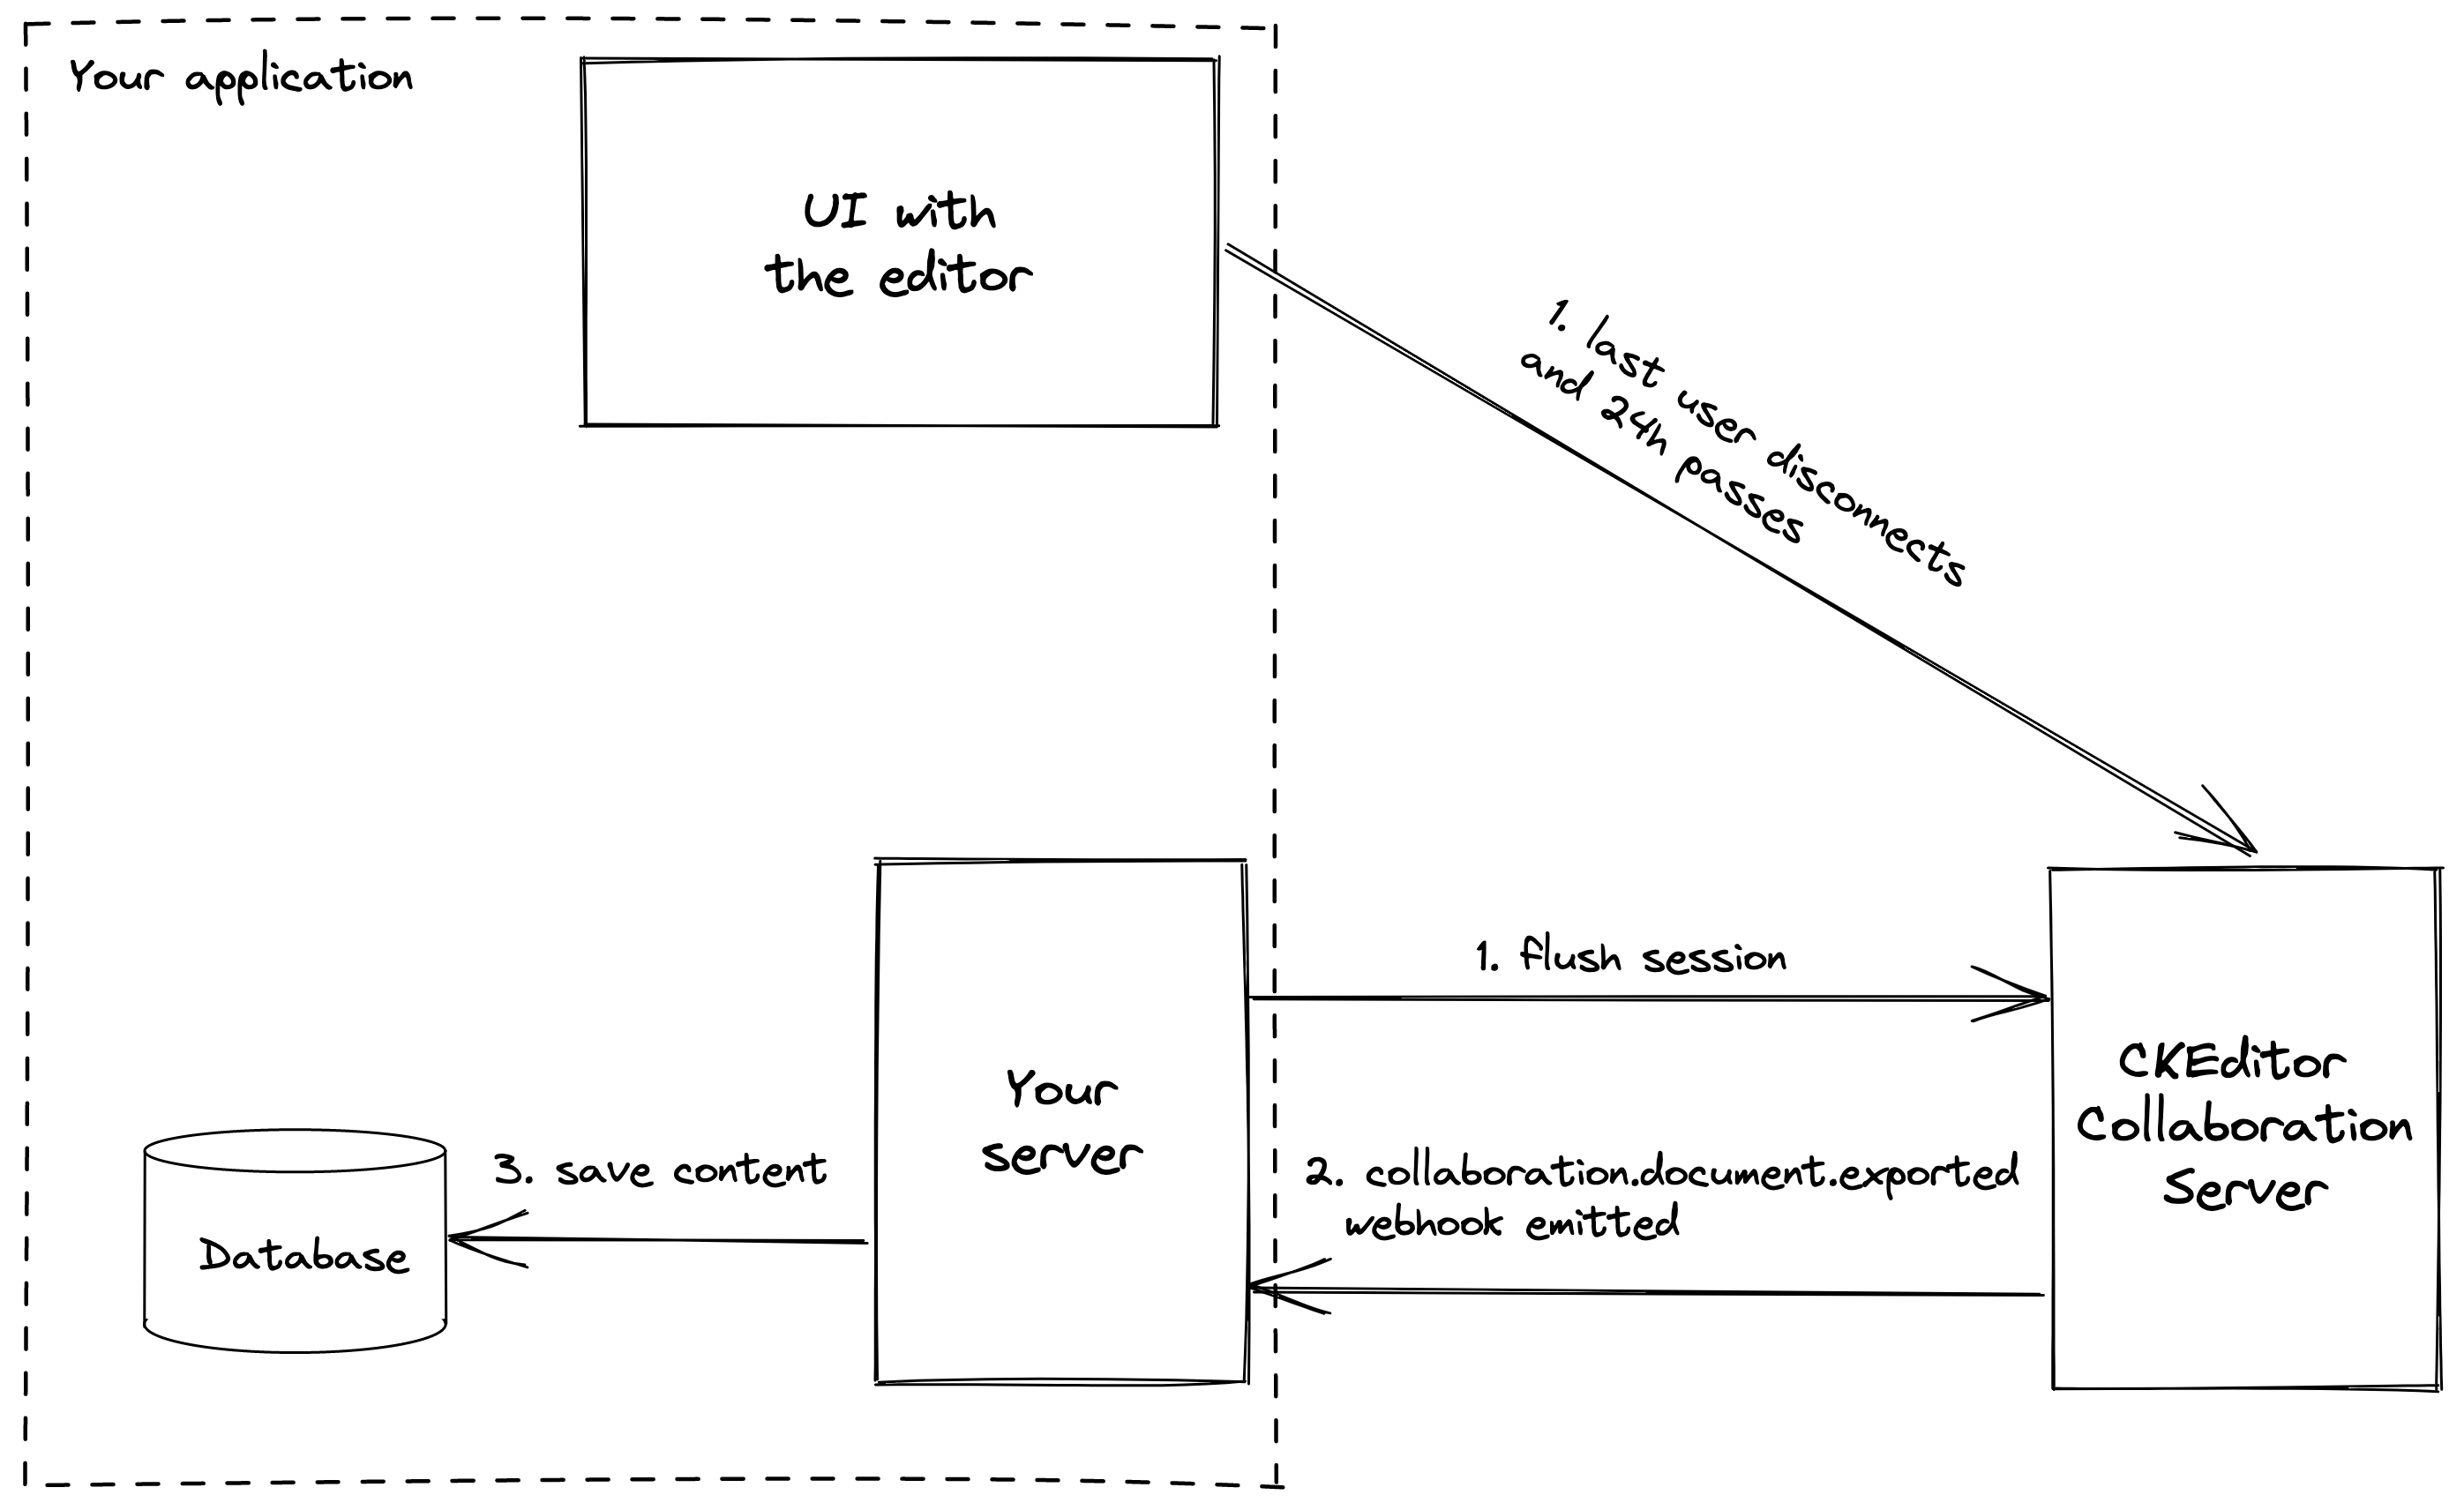 The workflow of saving data returned by the collaboration.document.exported webhook.